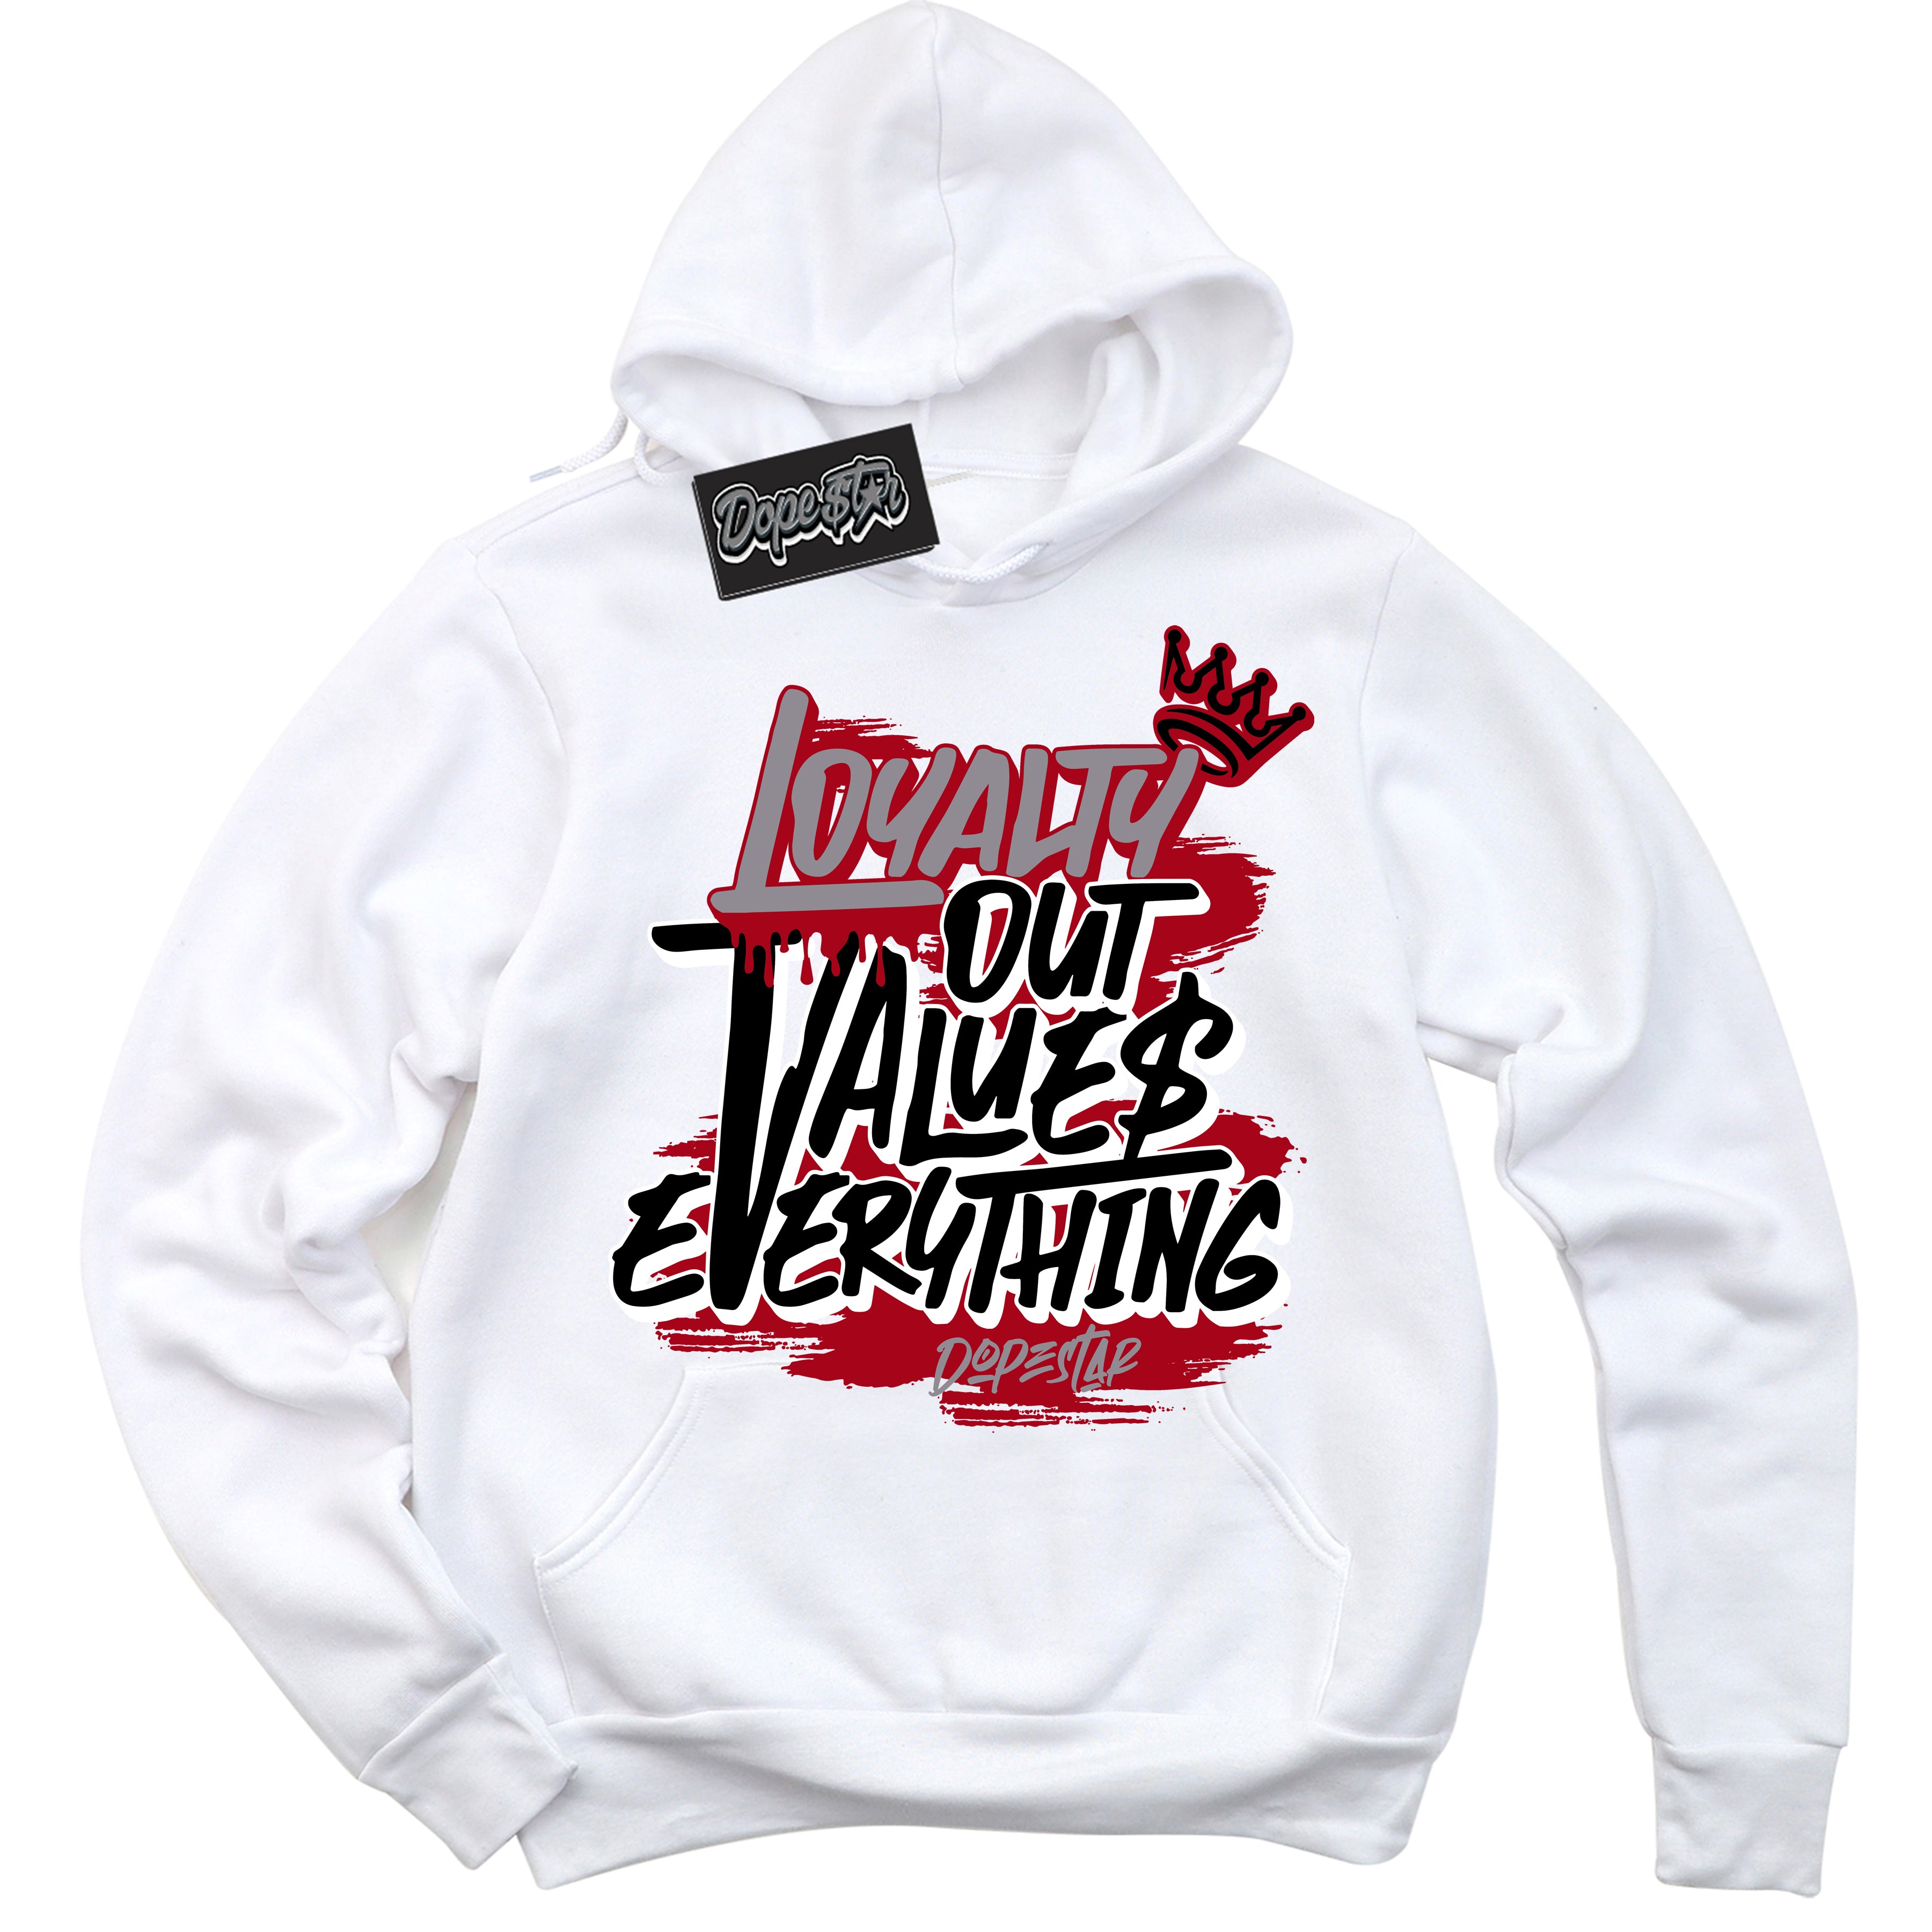 Cool White Hoodie with “ Loyalty Out Values Everything ”  design that Perfectly Matches Bred Reimagined 4s Sneakers.